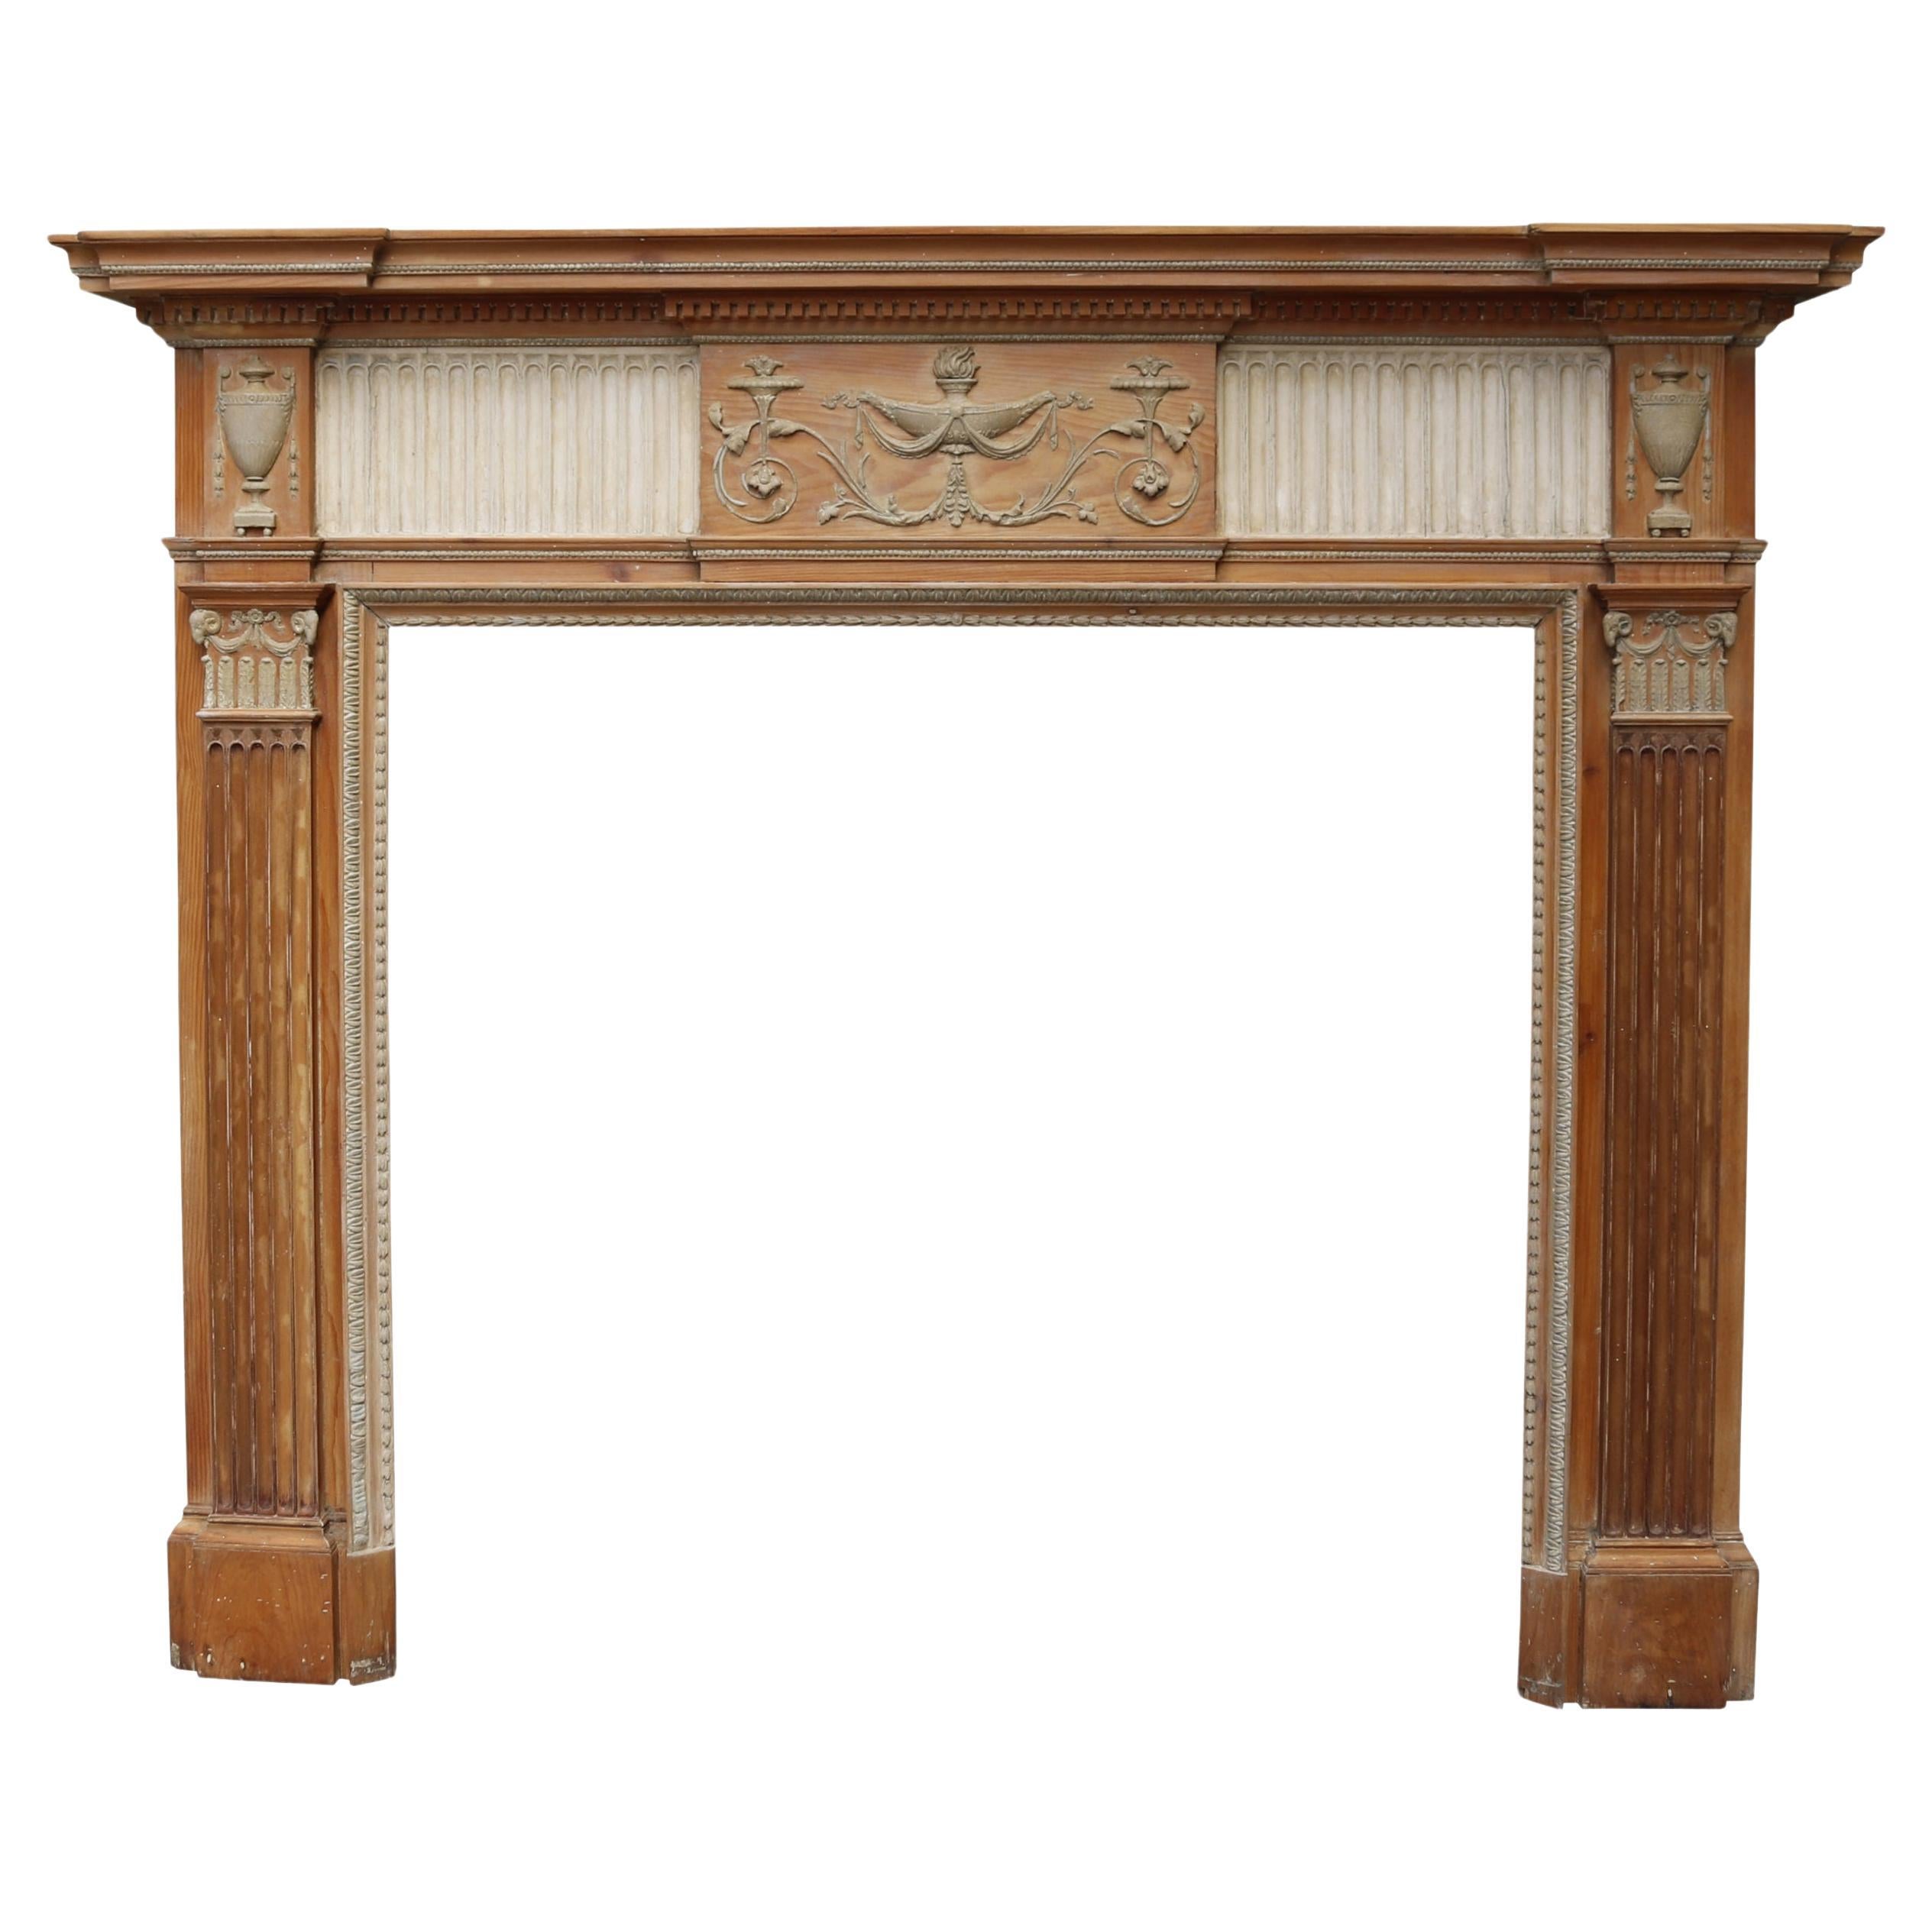 An Antique Georgian Neoclassical Style Fire Mantel For Sale